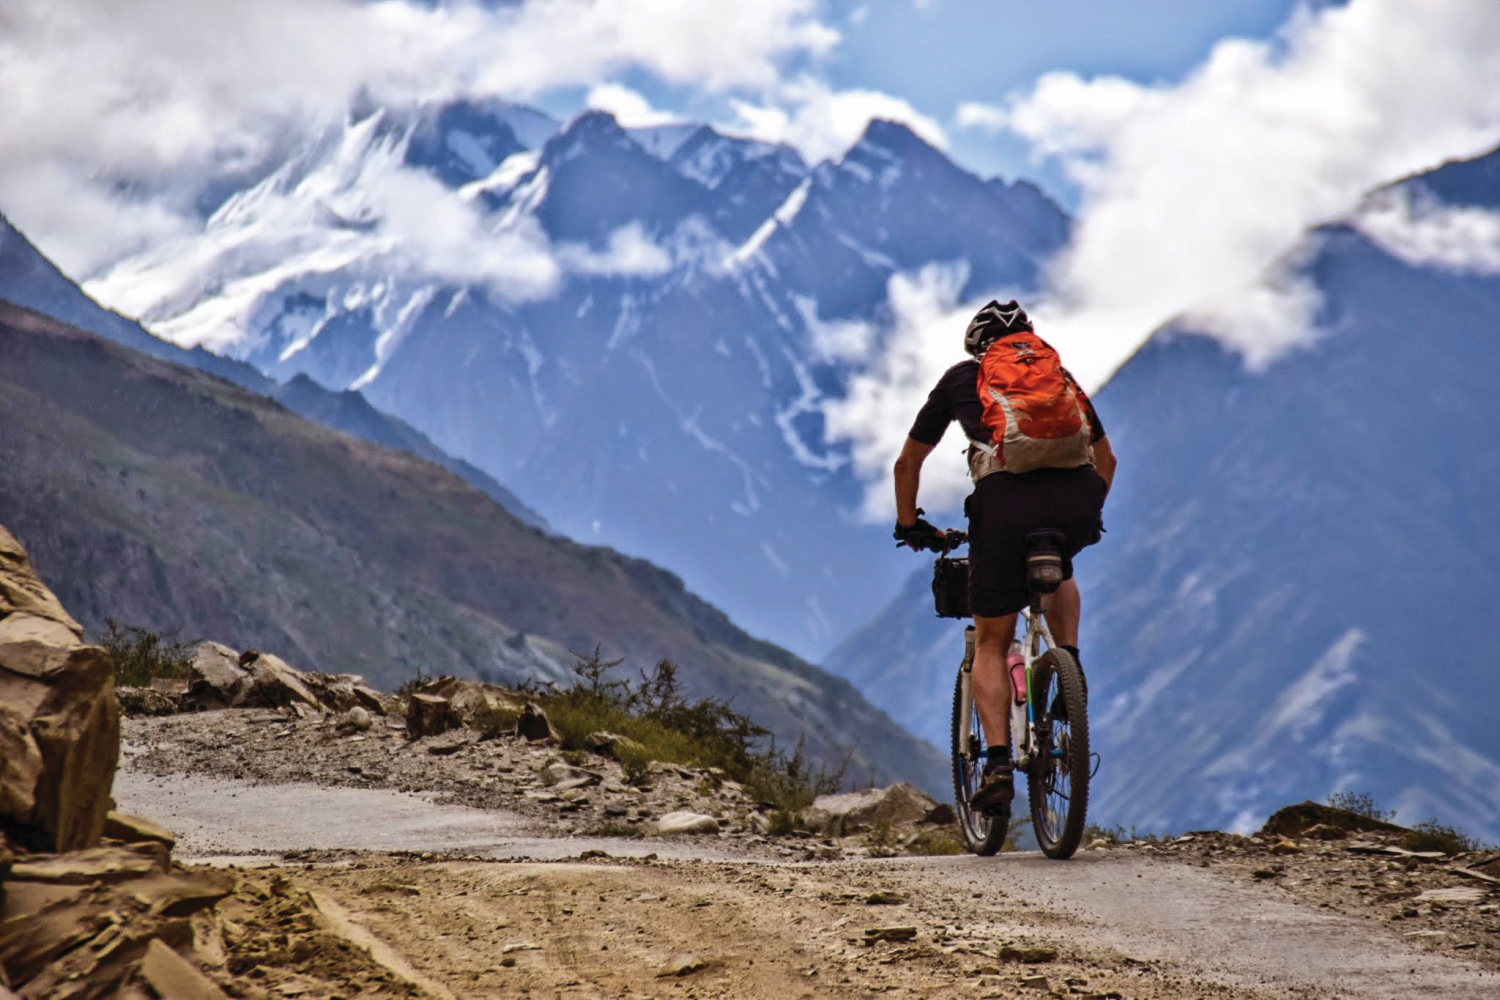 Man cycling along rocky road with mountains in background, Himalayan Mountains